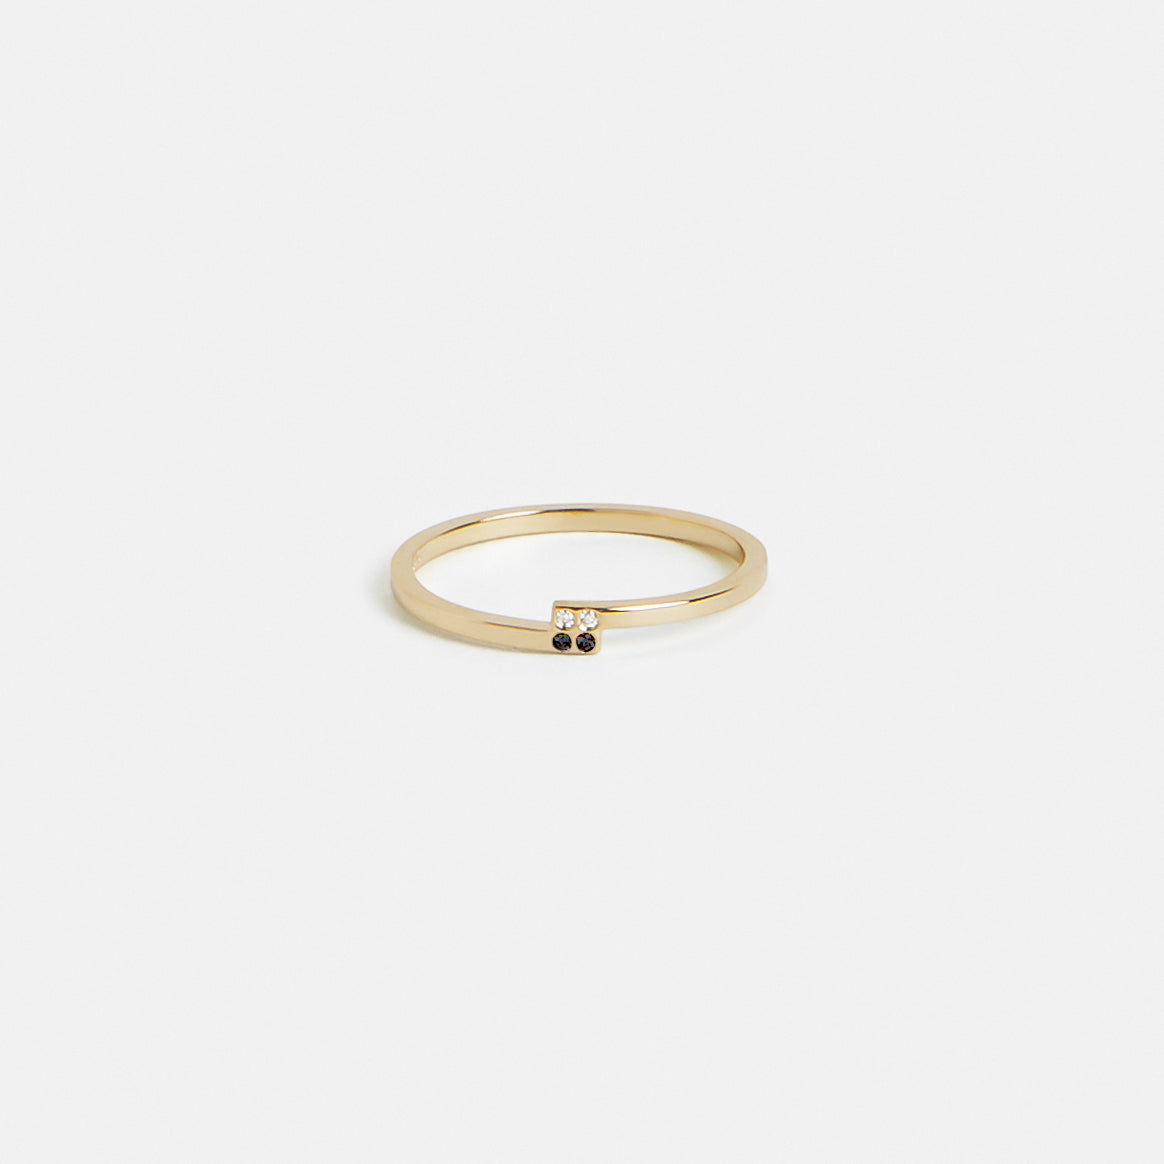 Piva Simple Ring in 14k Gold set with White and Black Diamonds By SHW Fine Jewelry NYC